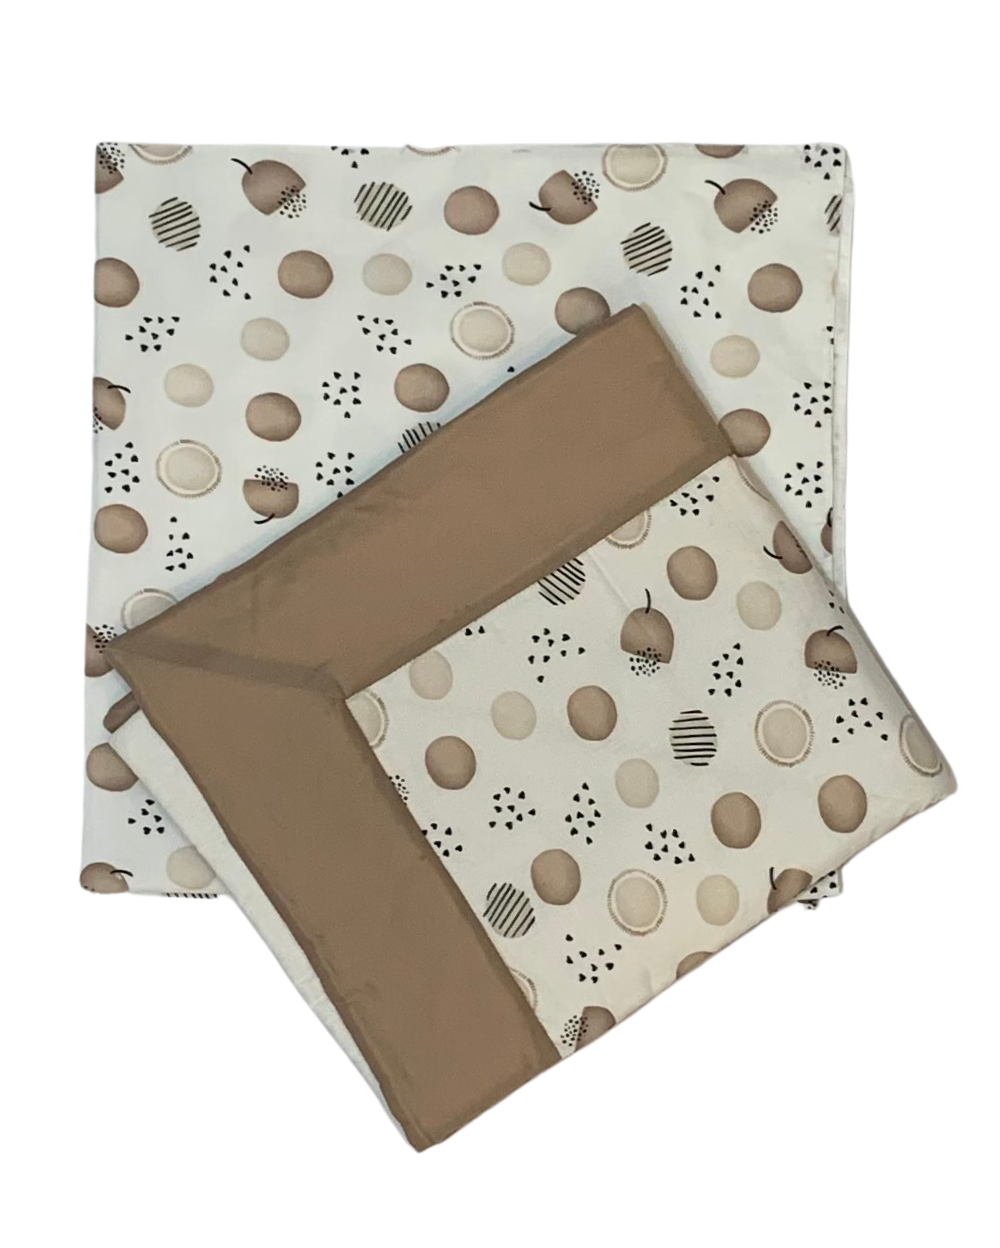 100% cotton baby blanket & baby swaddle sets